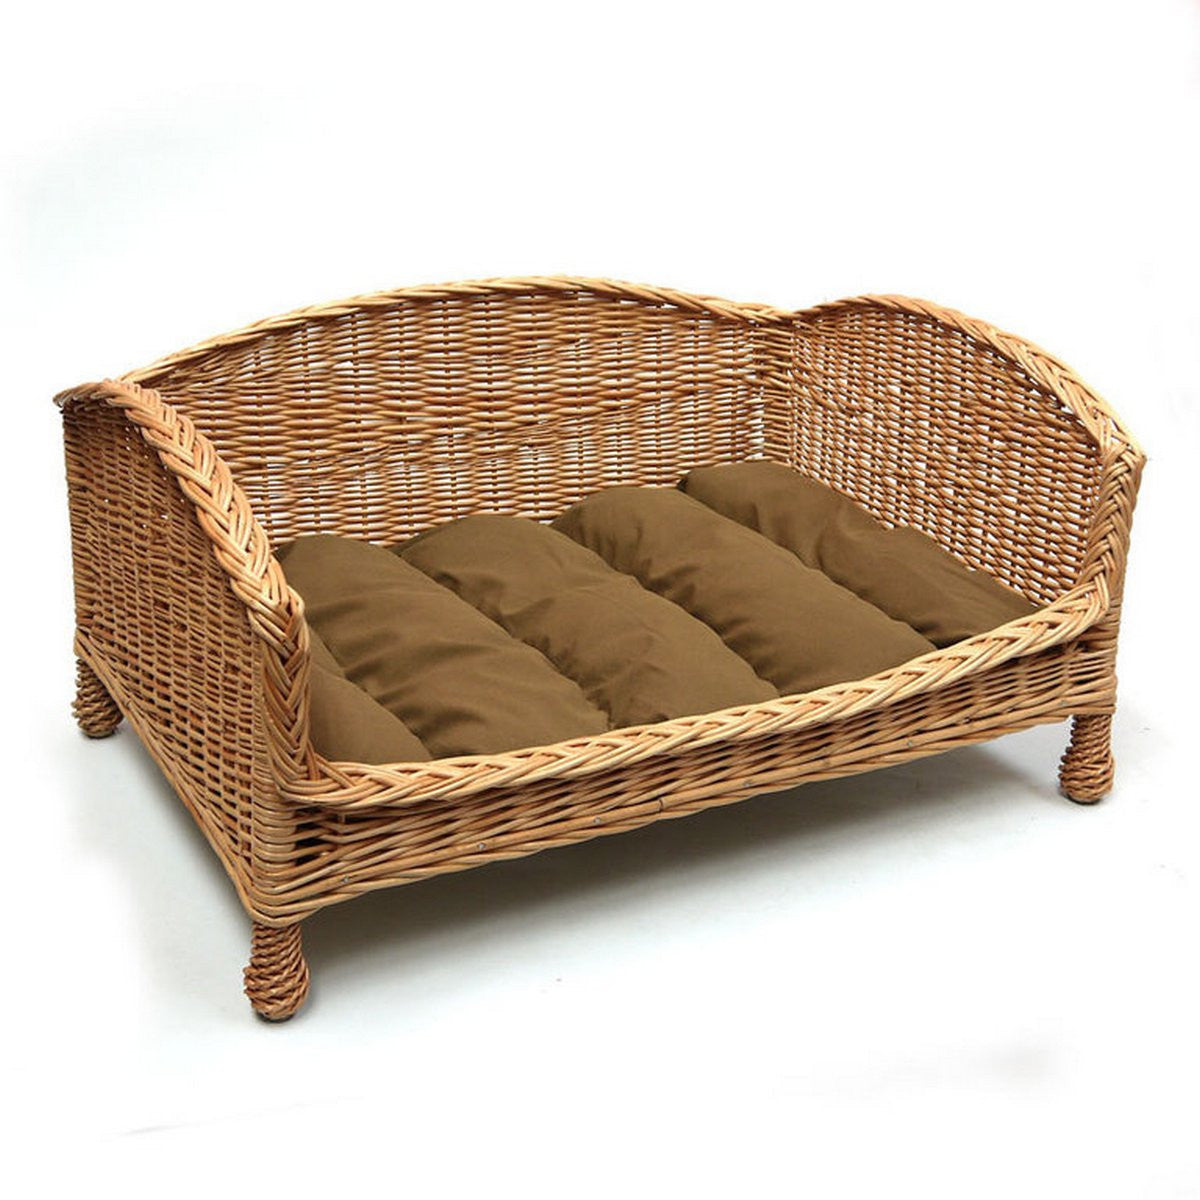 Luxury Wicker Dog Bed - Fernie's Choice Classic Country Wear for Dogs